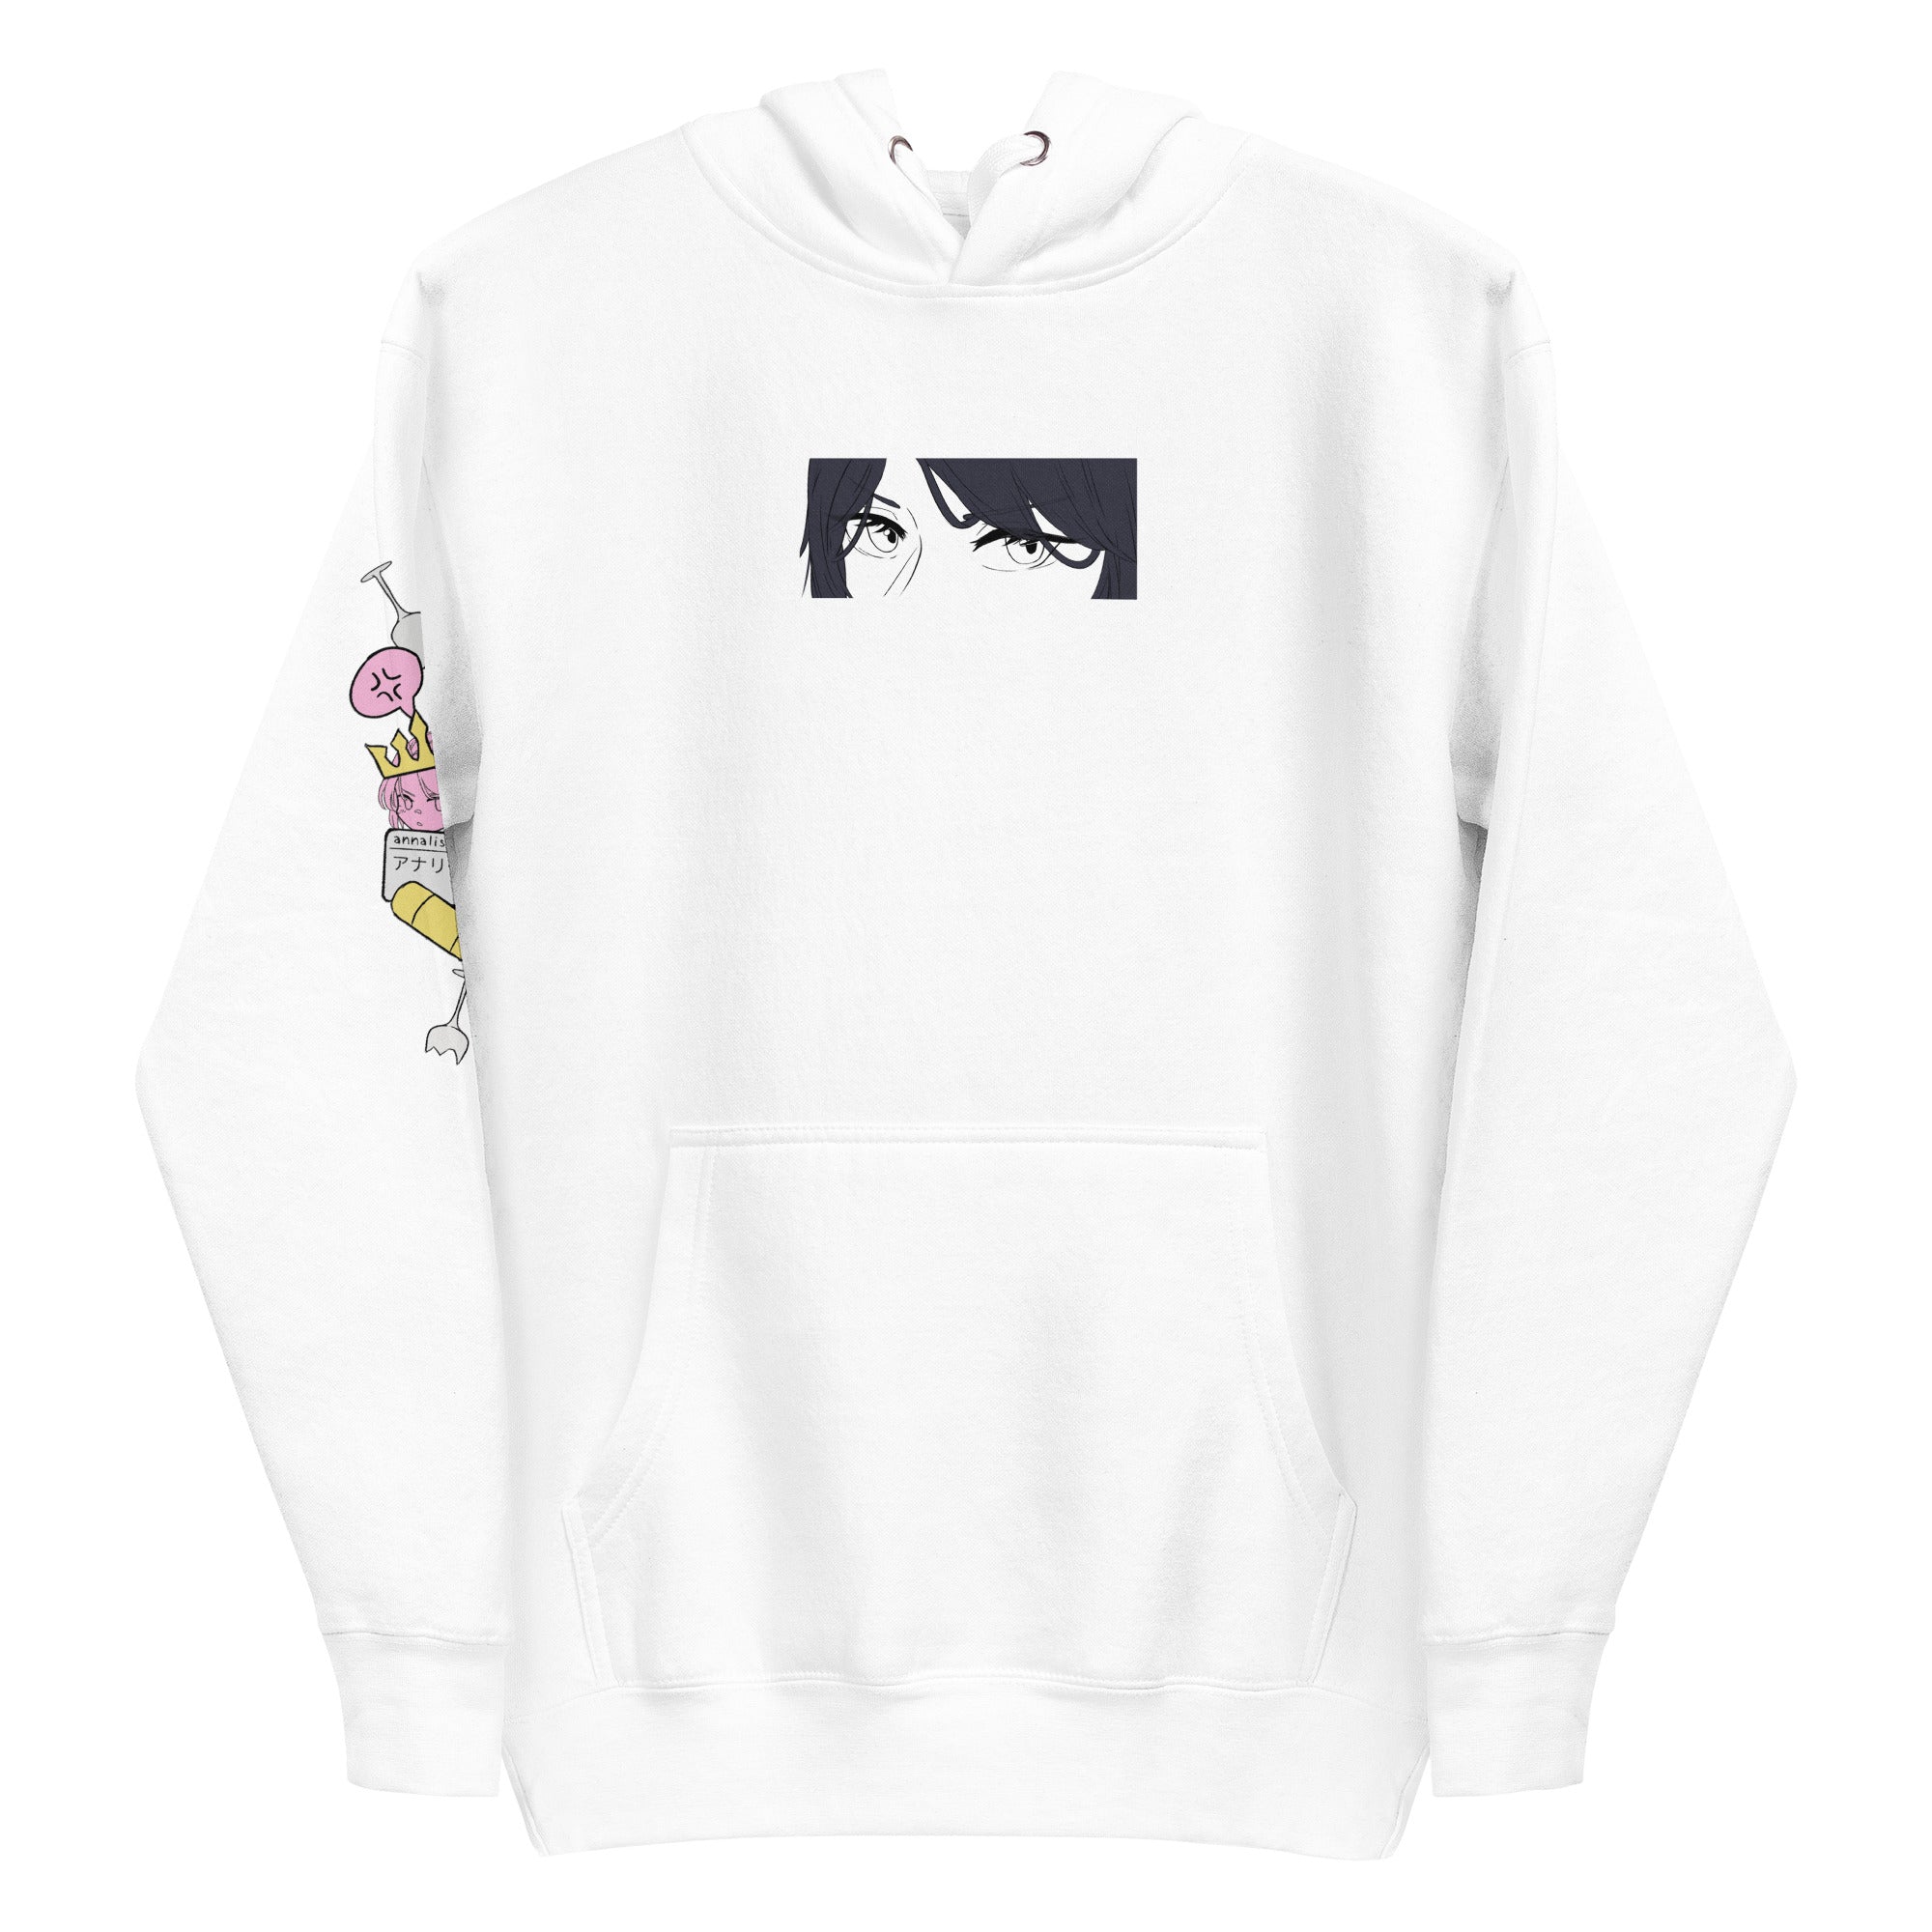 DISCONTENT V2 • anime hoodie - Jackler - anime-inspired streetwear - anime clothing